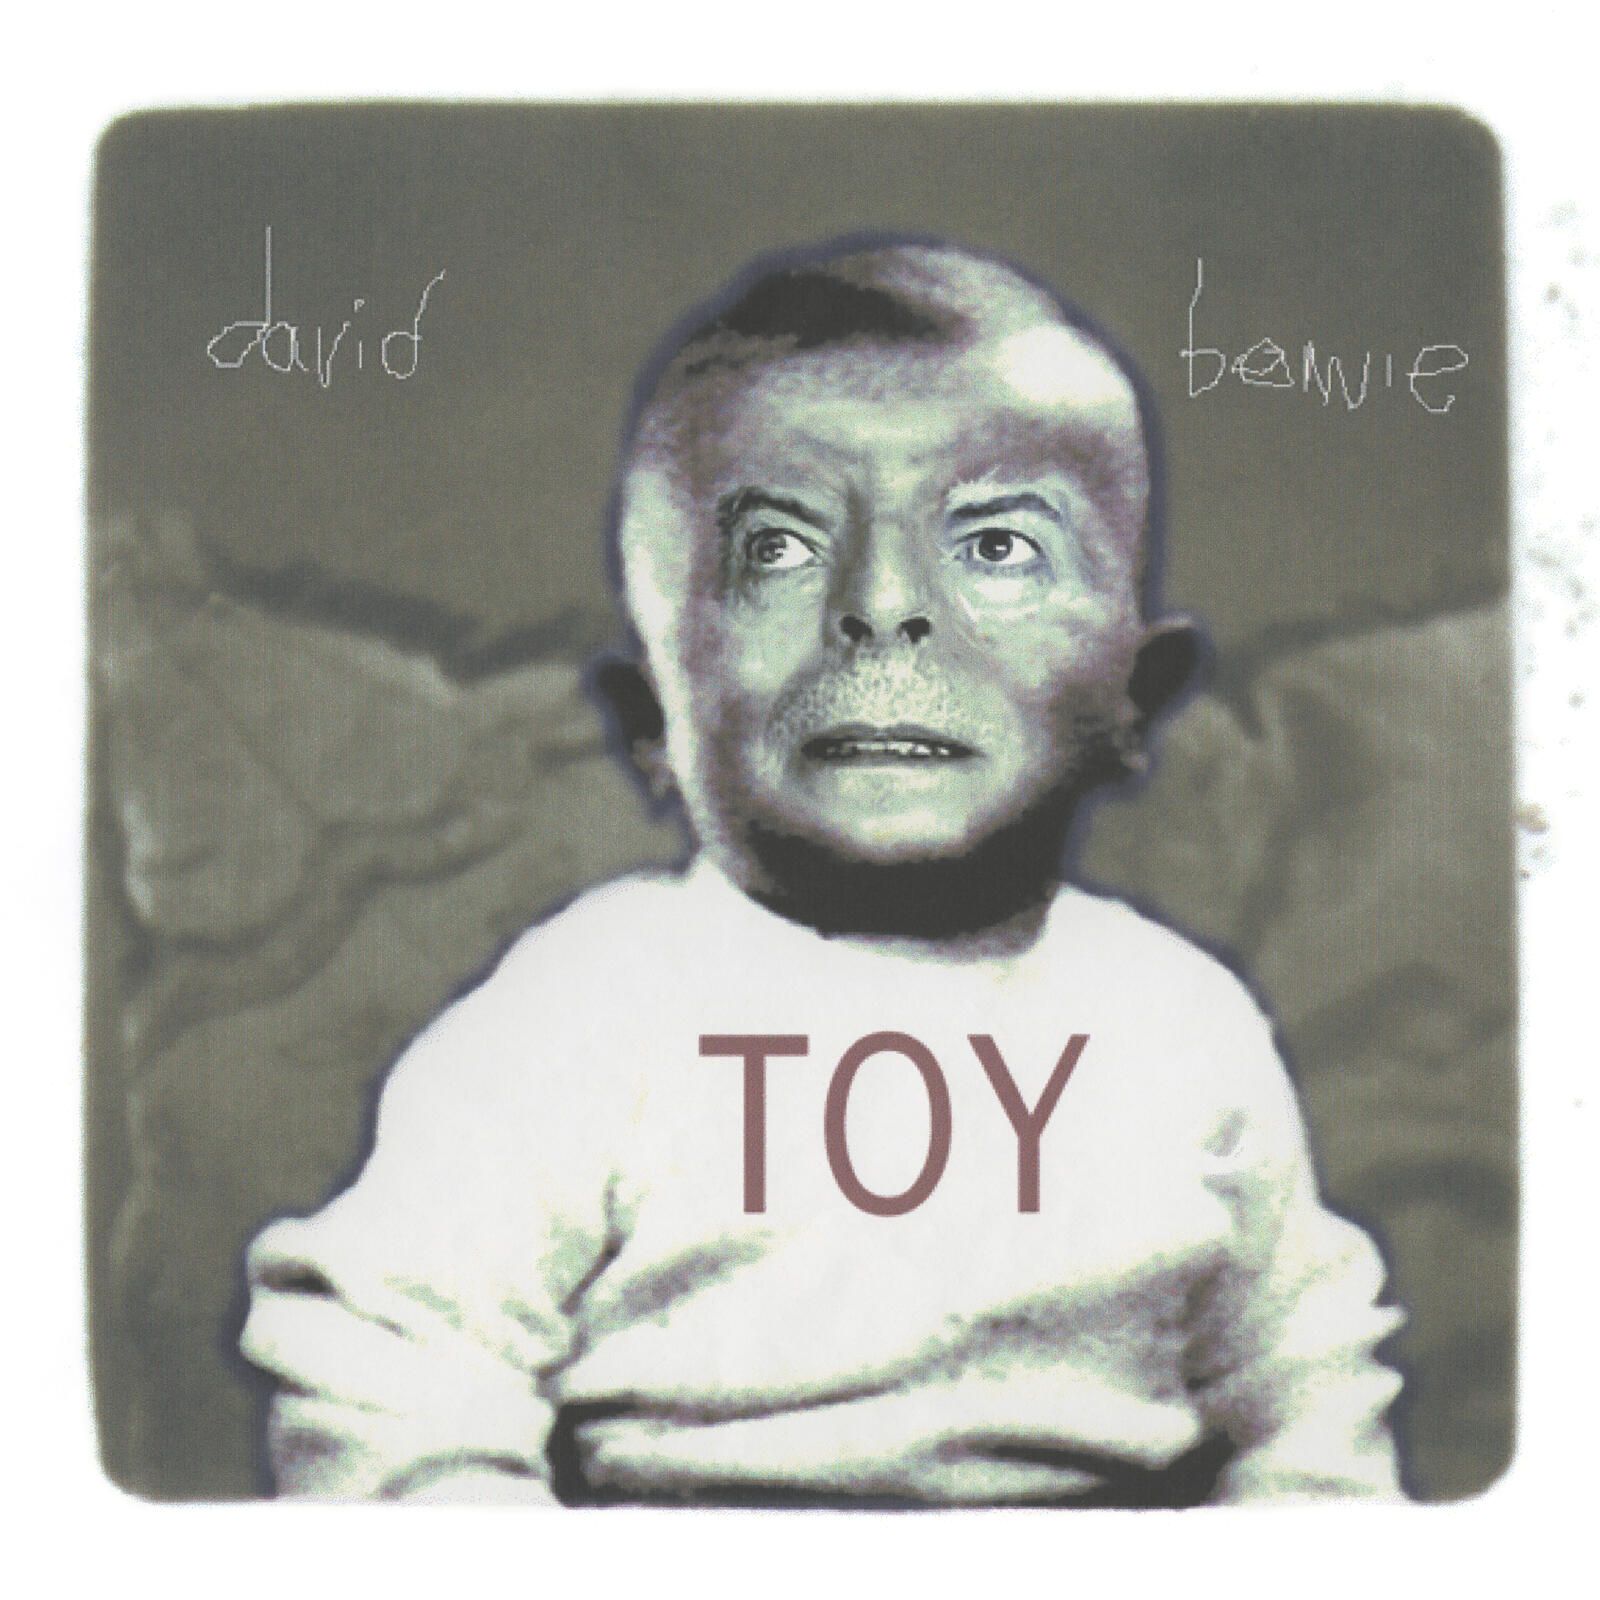 David Bowie – Toy. Limited Edition (6x10 LP)